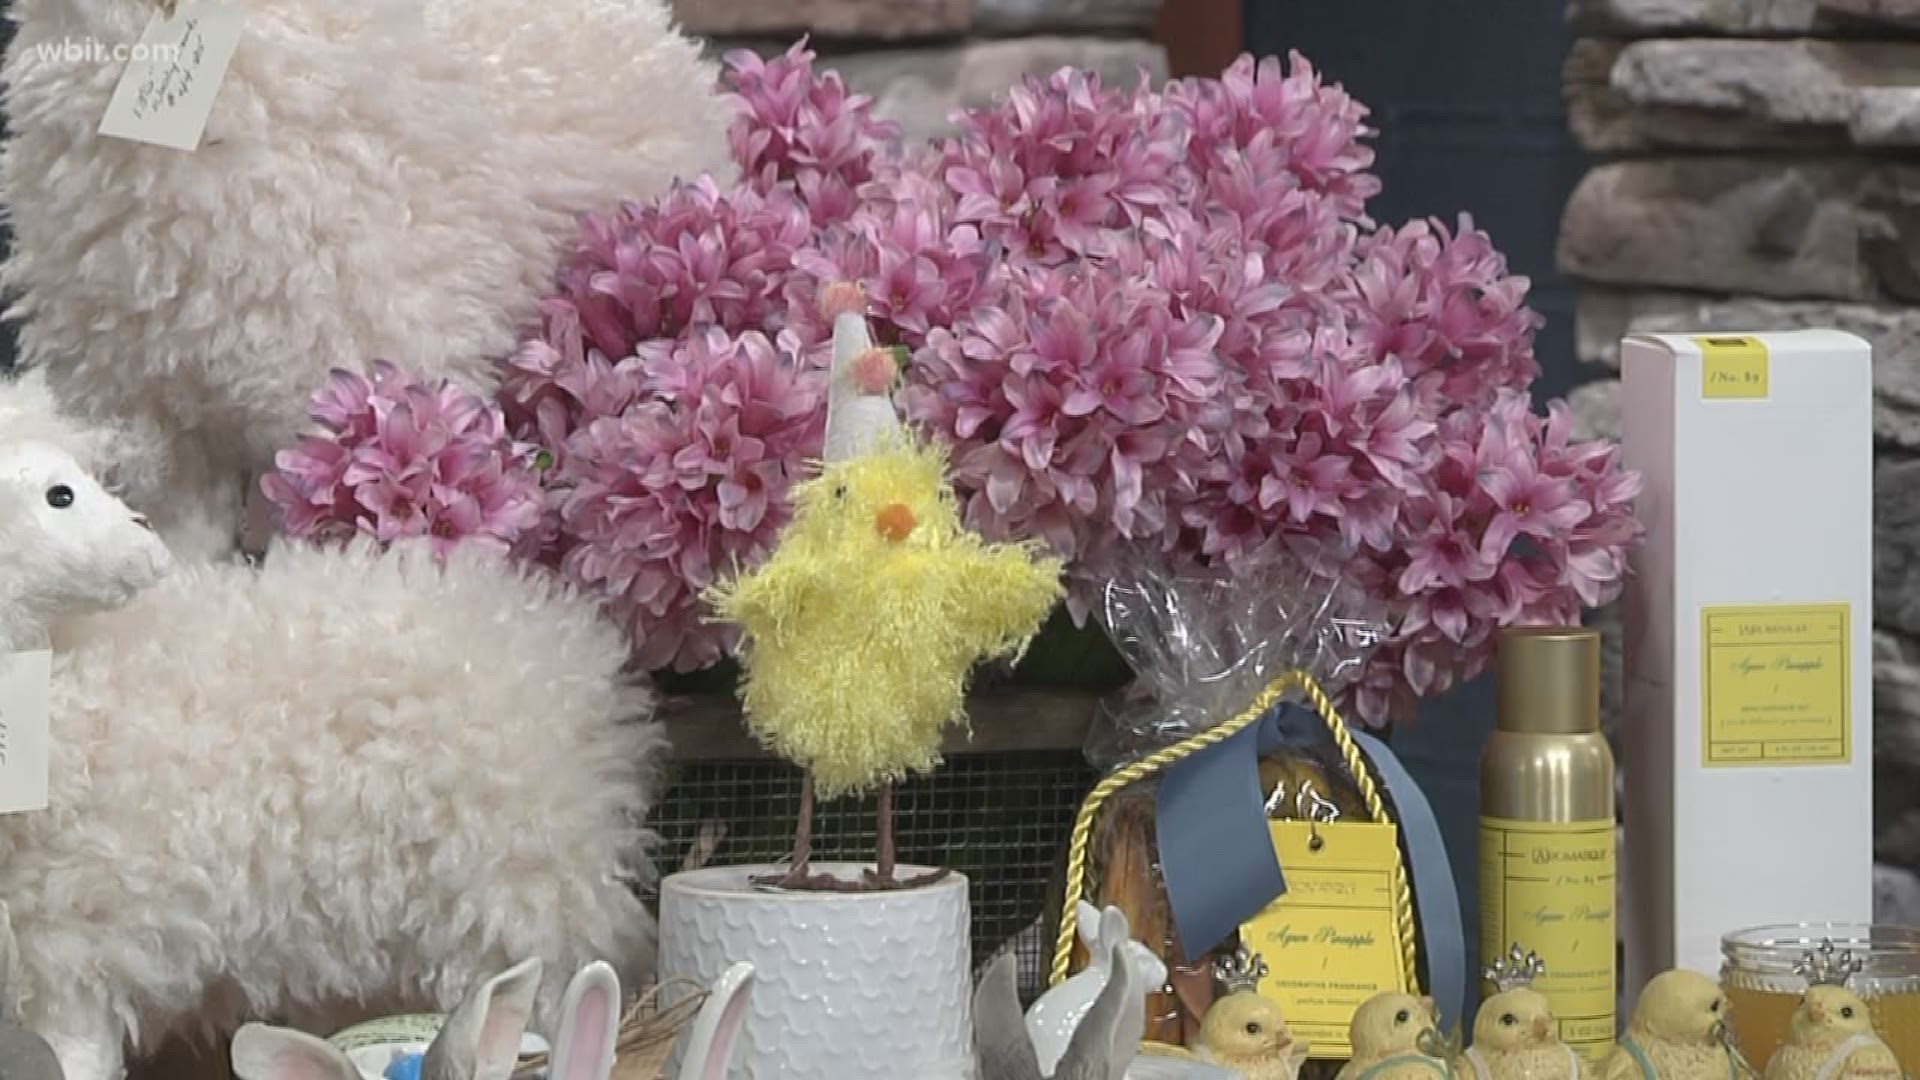 Sam Franklin shows us how to get our homes ready for Easter.